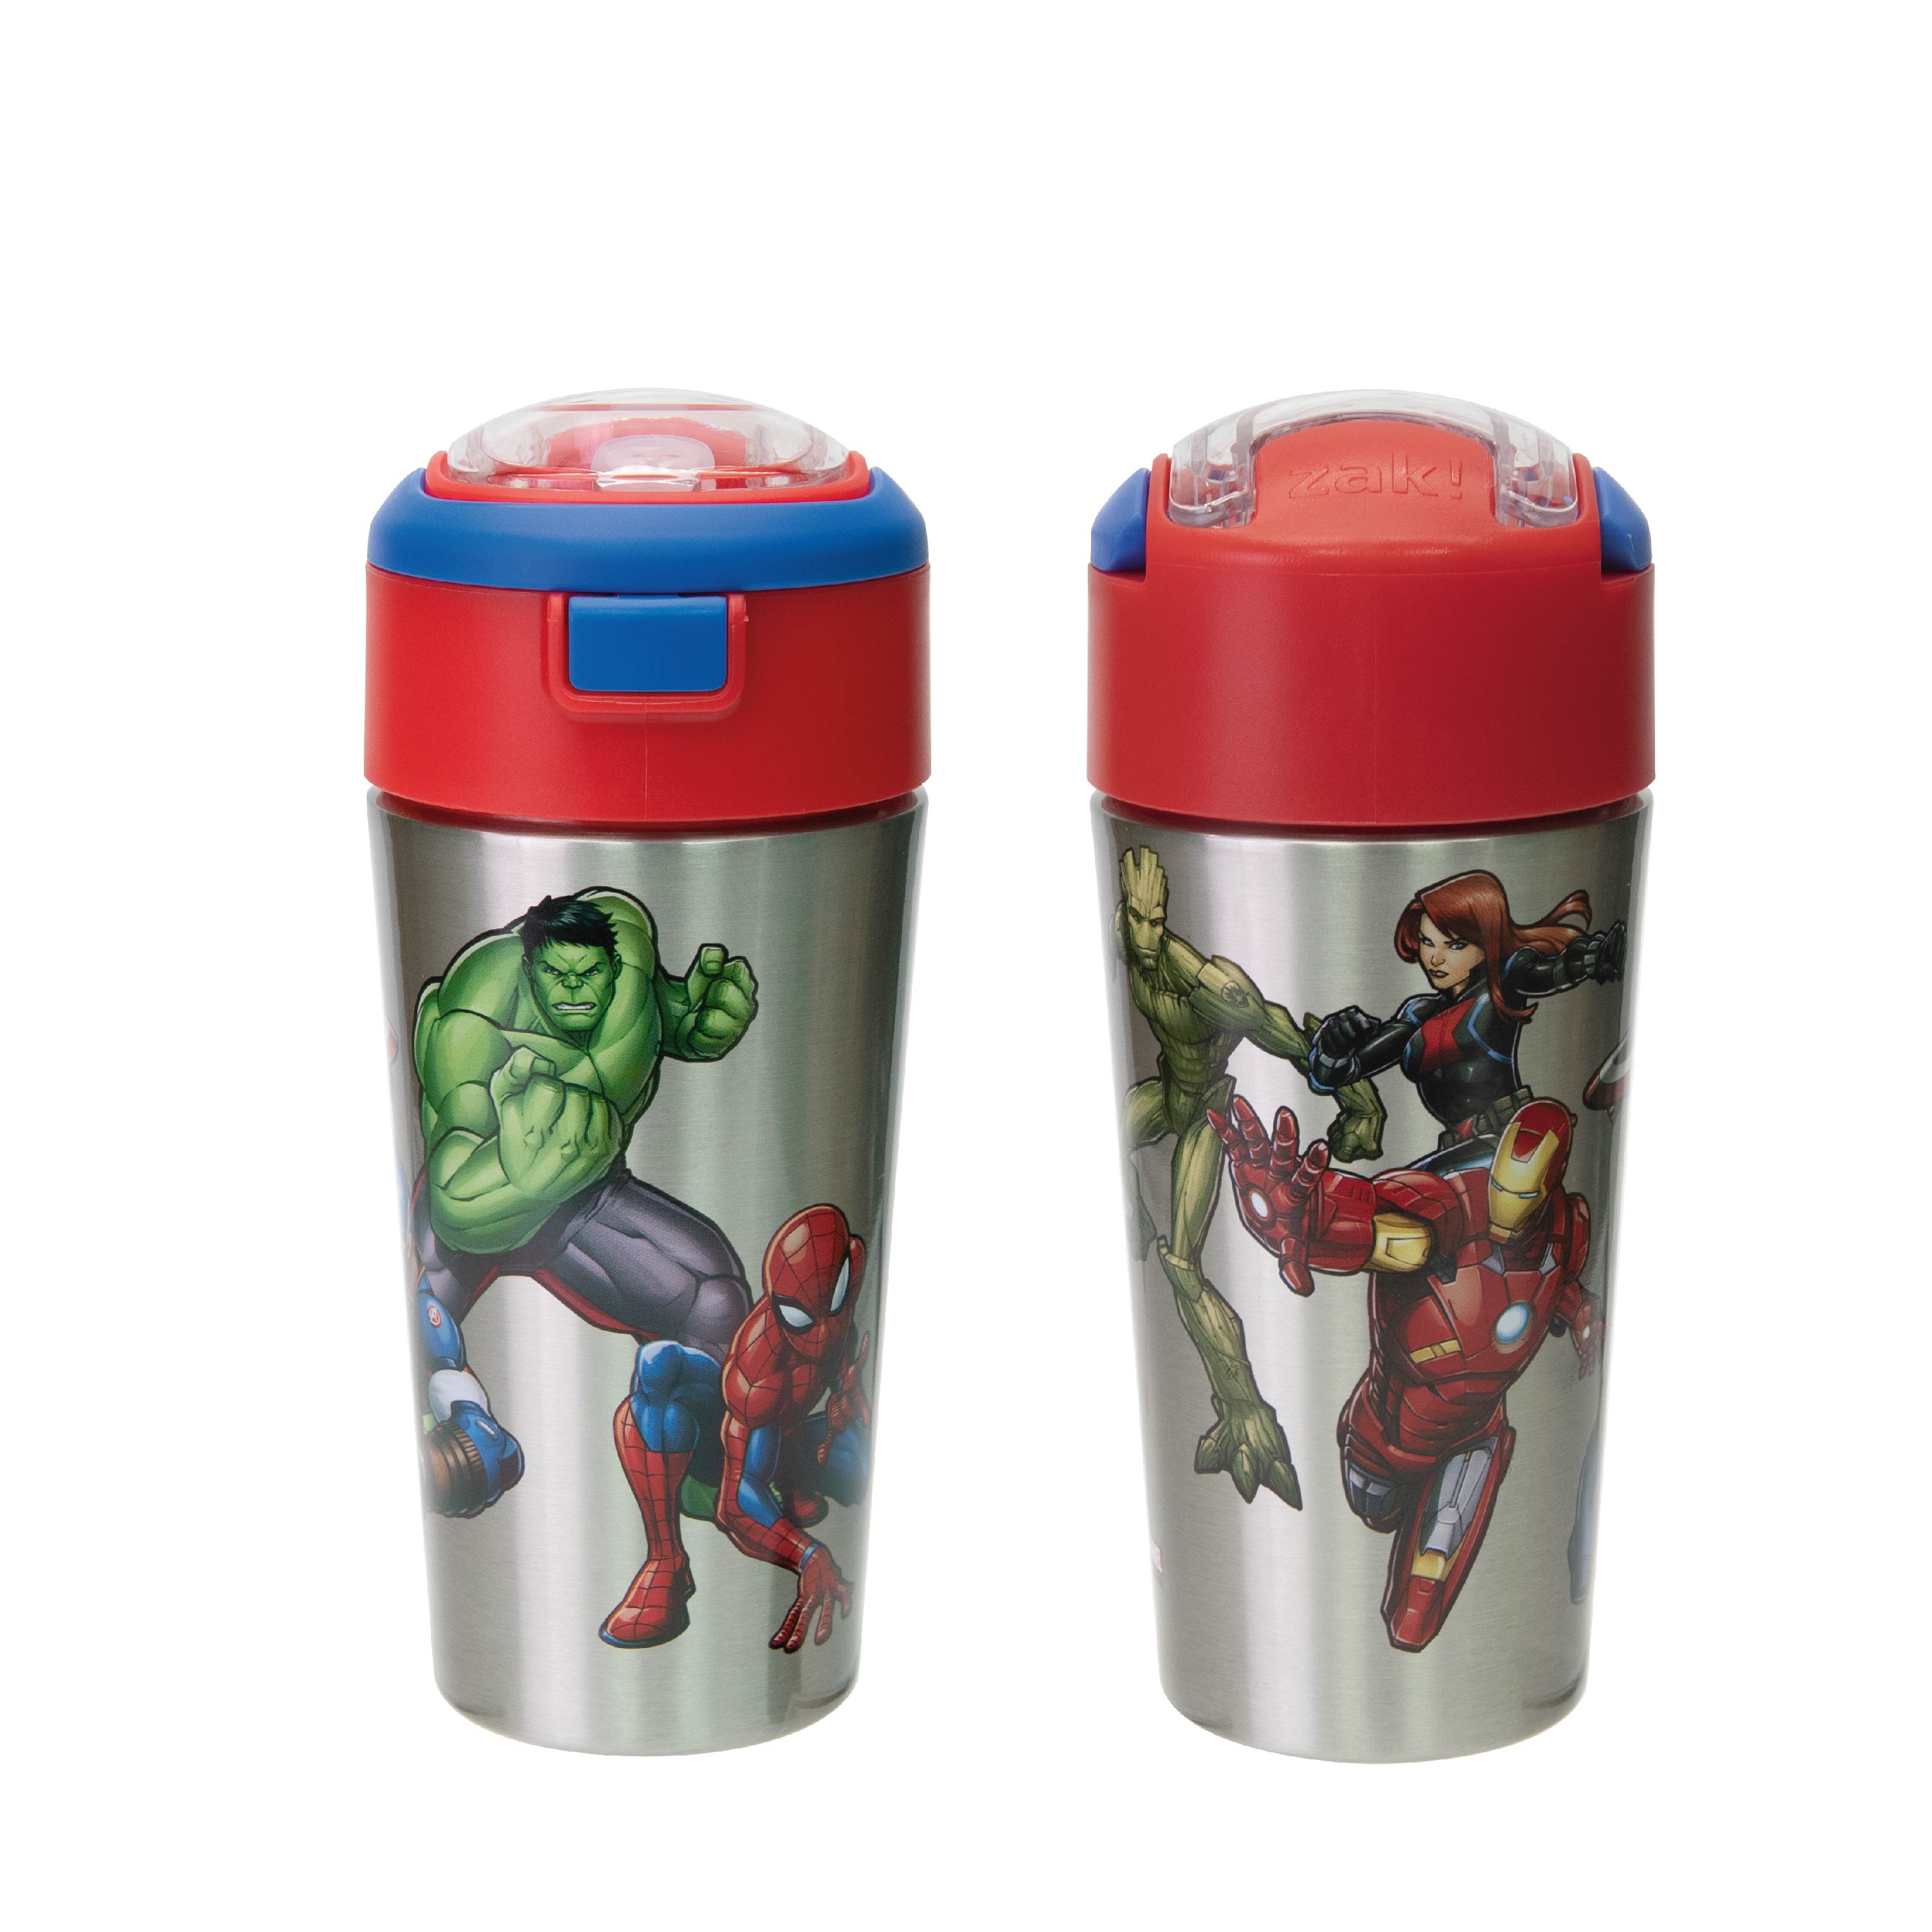 Marvel Comics 12 ounce Vacuum Insulated Reusable Stainless Steel Water Bottle, Spider-Man, Ironman & The Hulk slideshow image 5